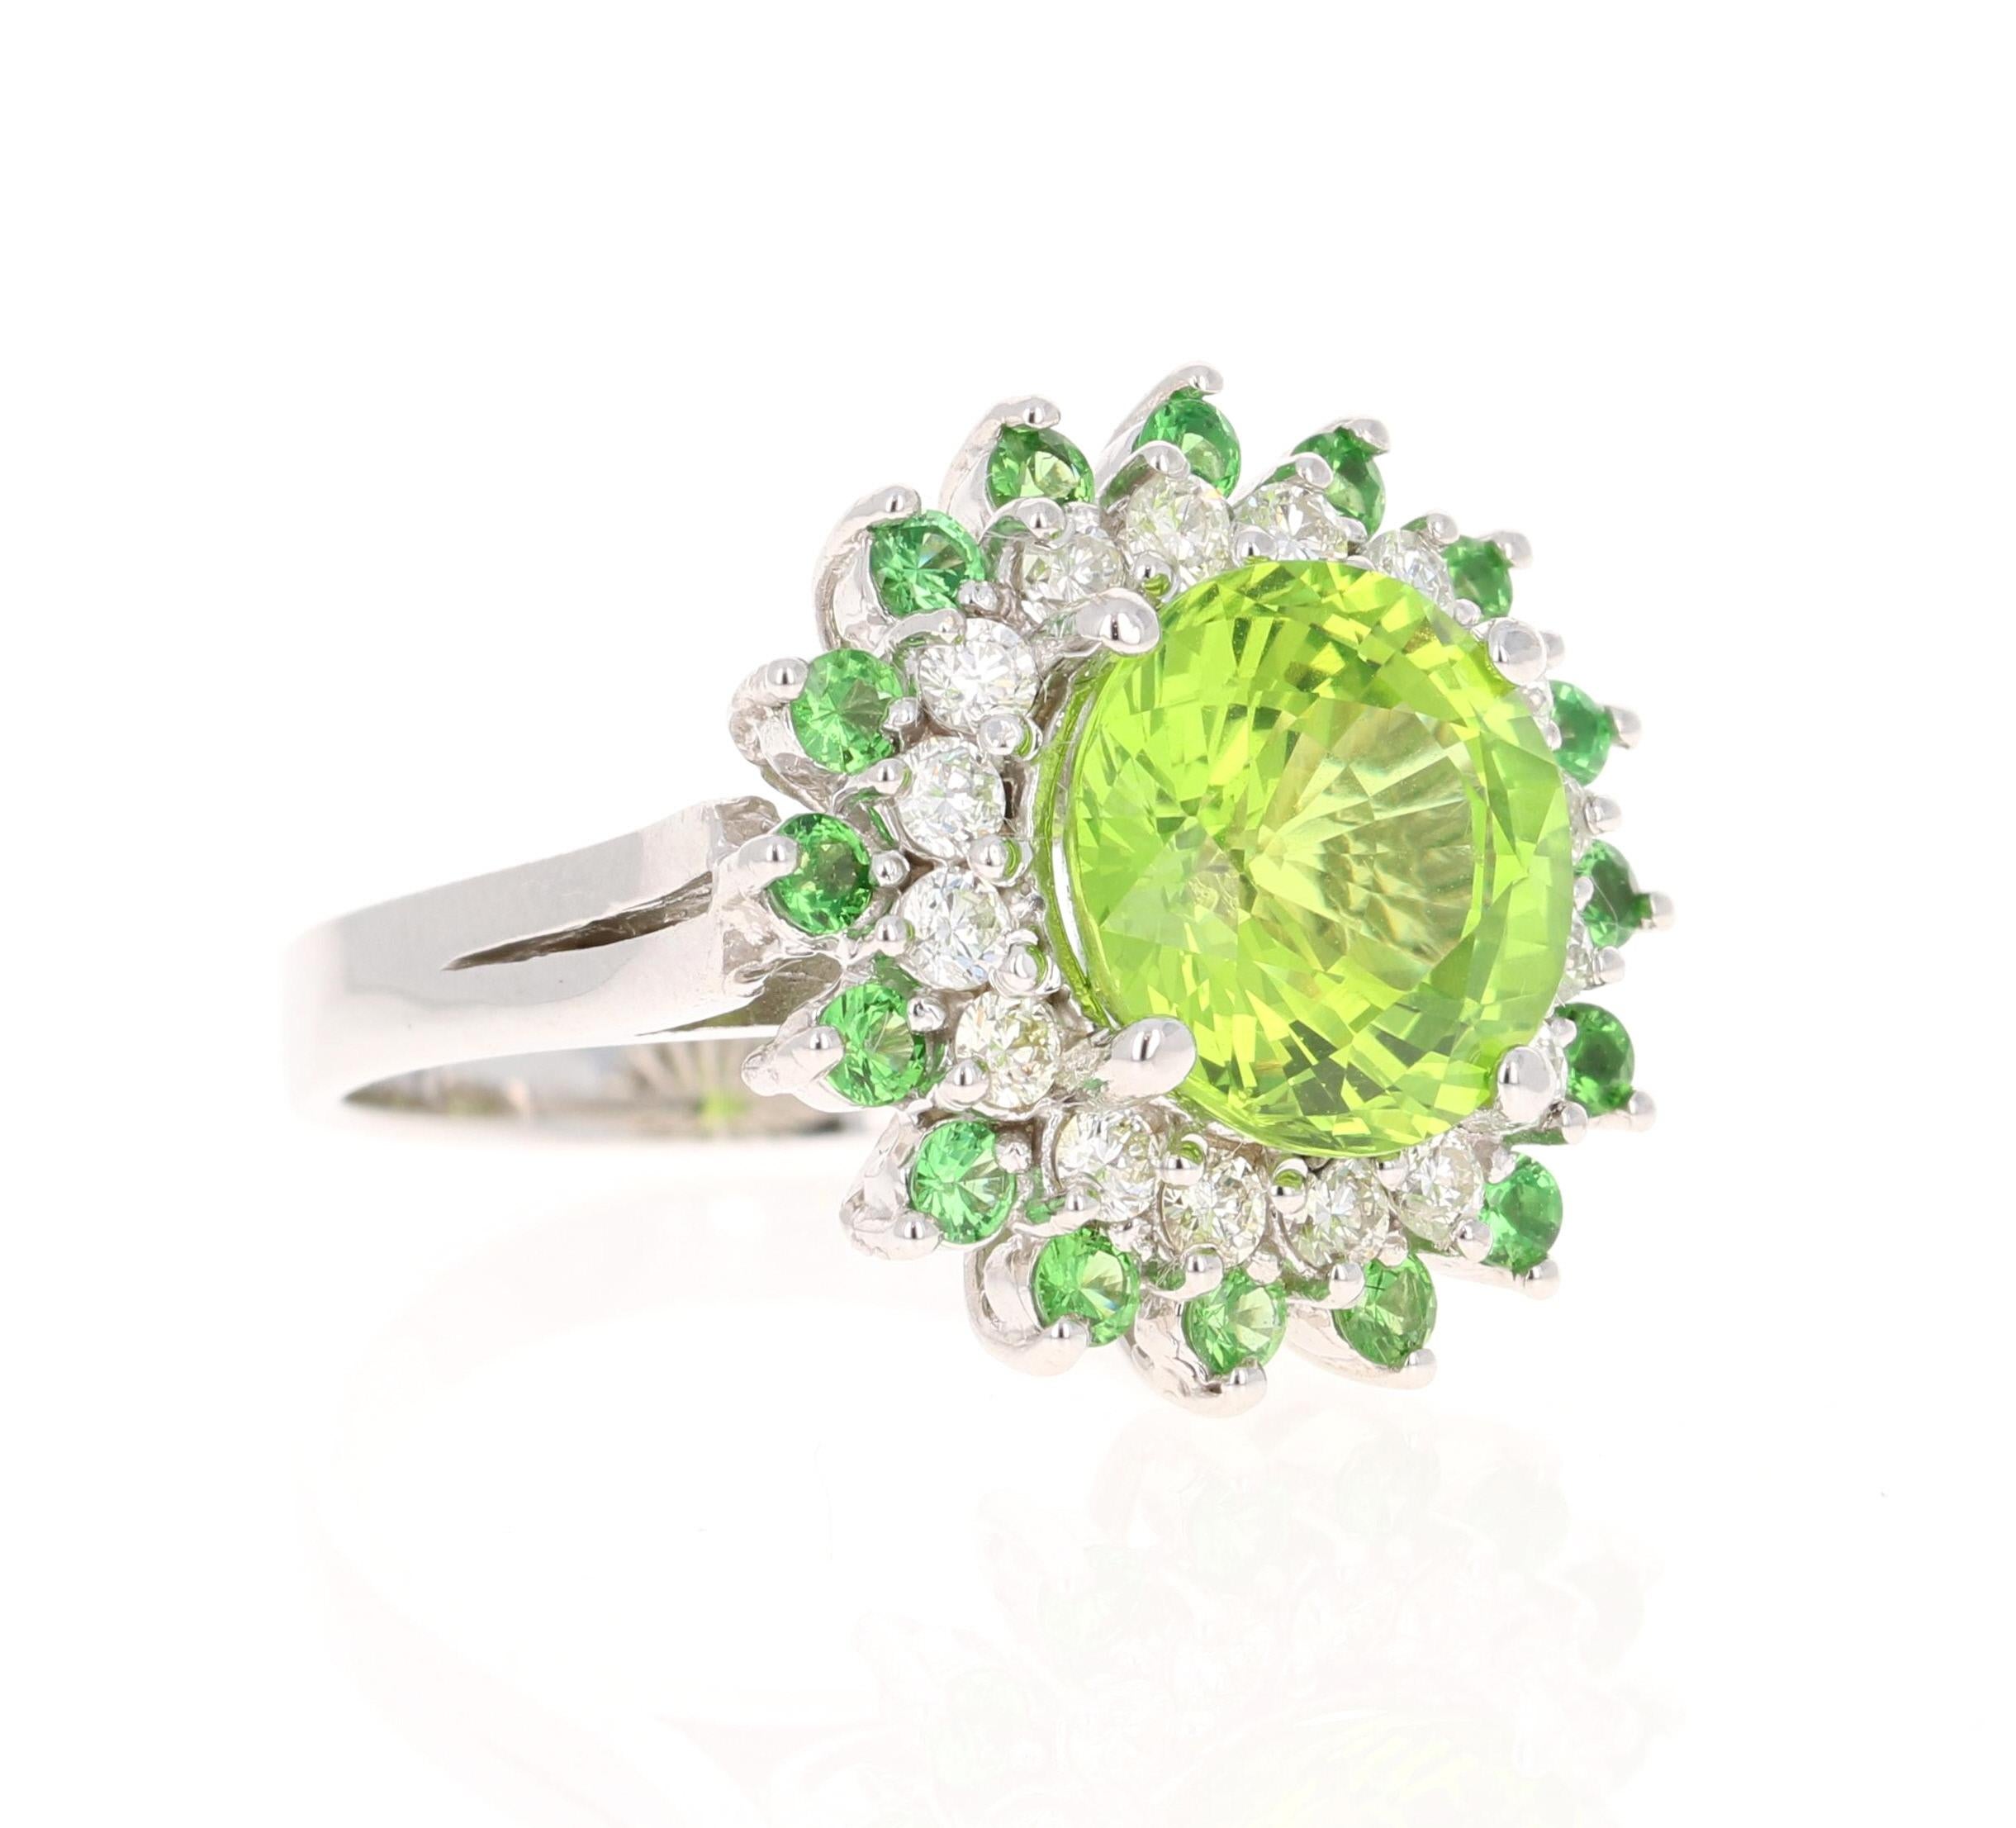 This ring has a Round Cut Natural Peridot that weighs 6.01 carats. It is surrounded by 16 Round Cut Natural Diamonds that weigh 0.62 Carats, (Clarity: VS, Color: H) and 16 Round Cut Natural Tsavorites that weigh 0.70 carats. 
The total carat weight